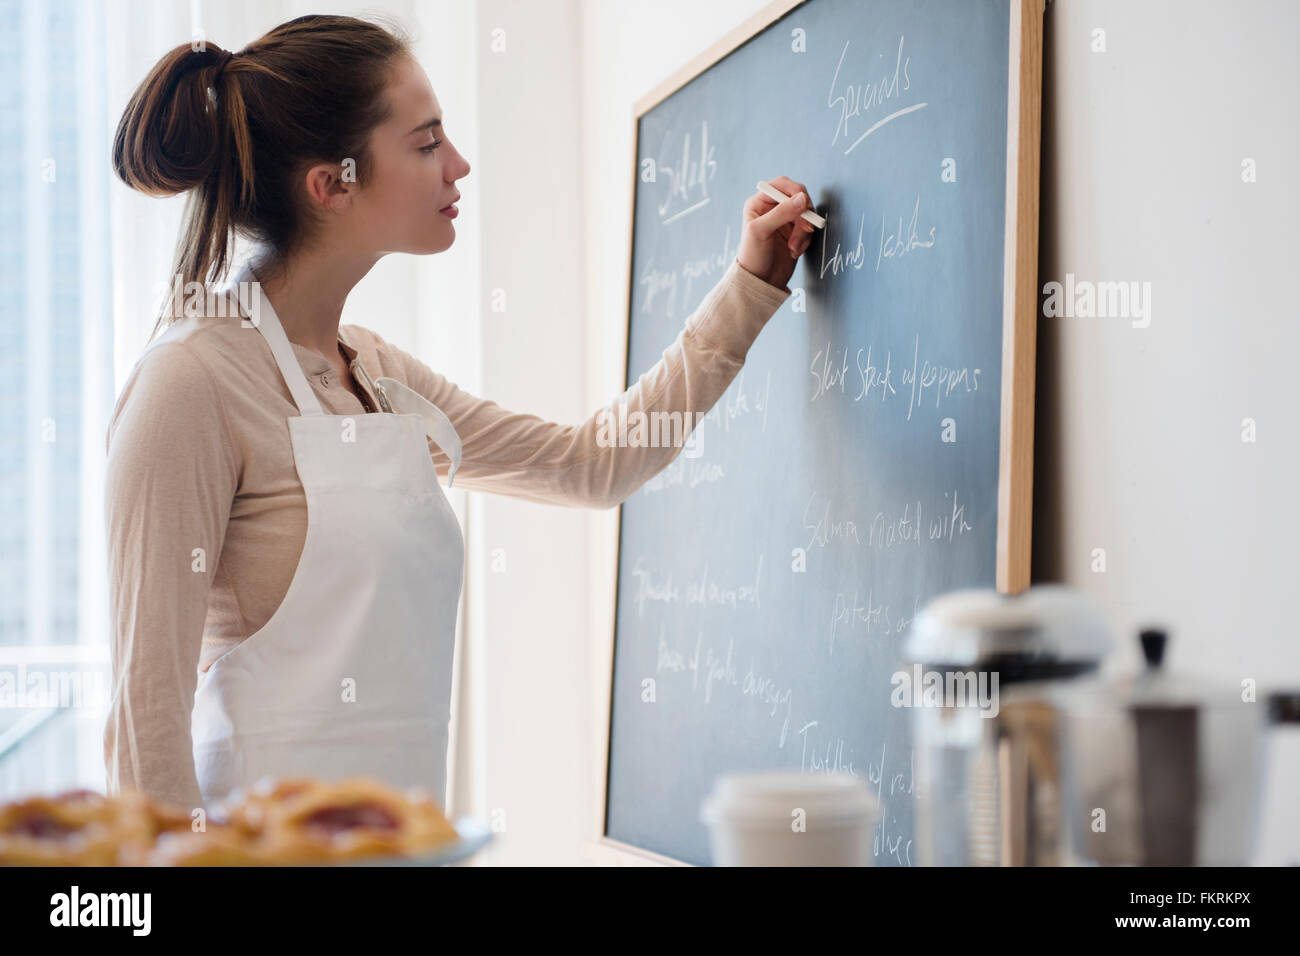 Native American woman writing on specials board in cafe Stock Photo